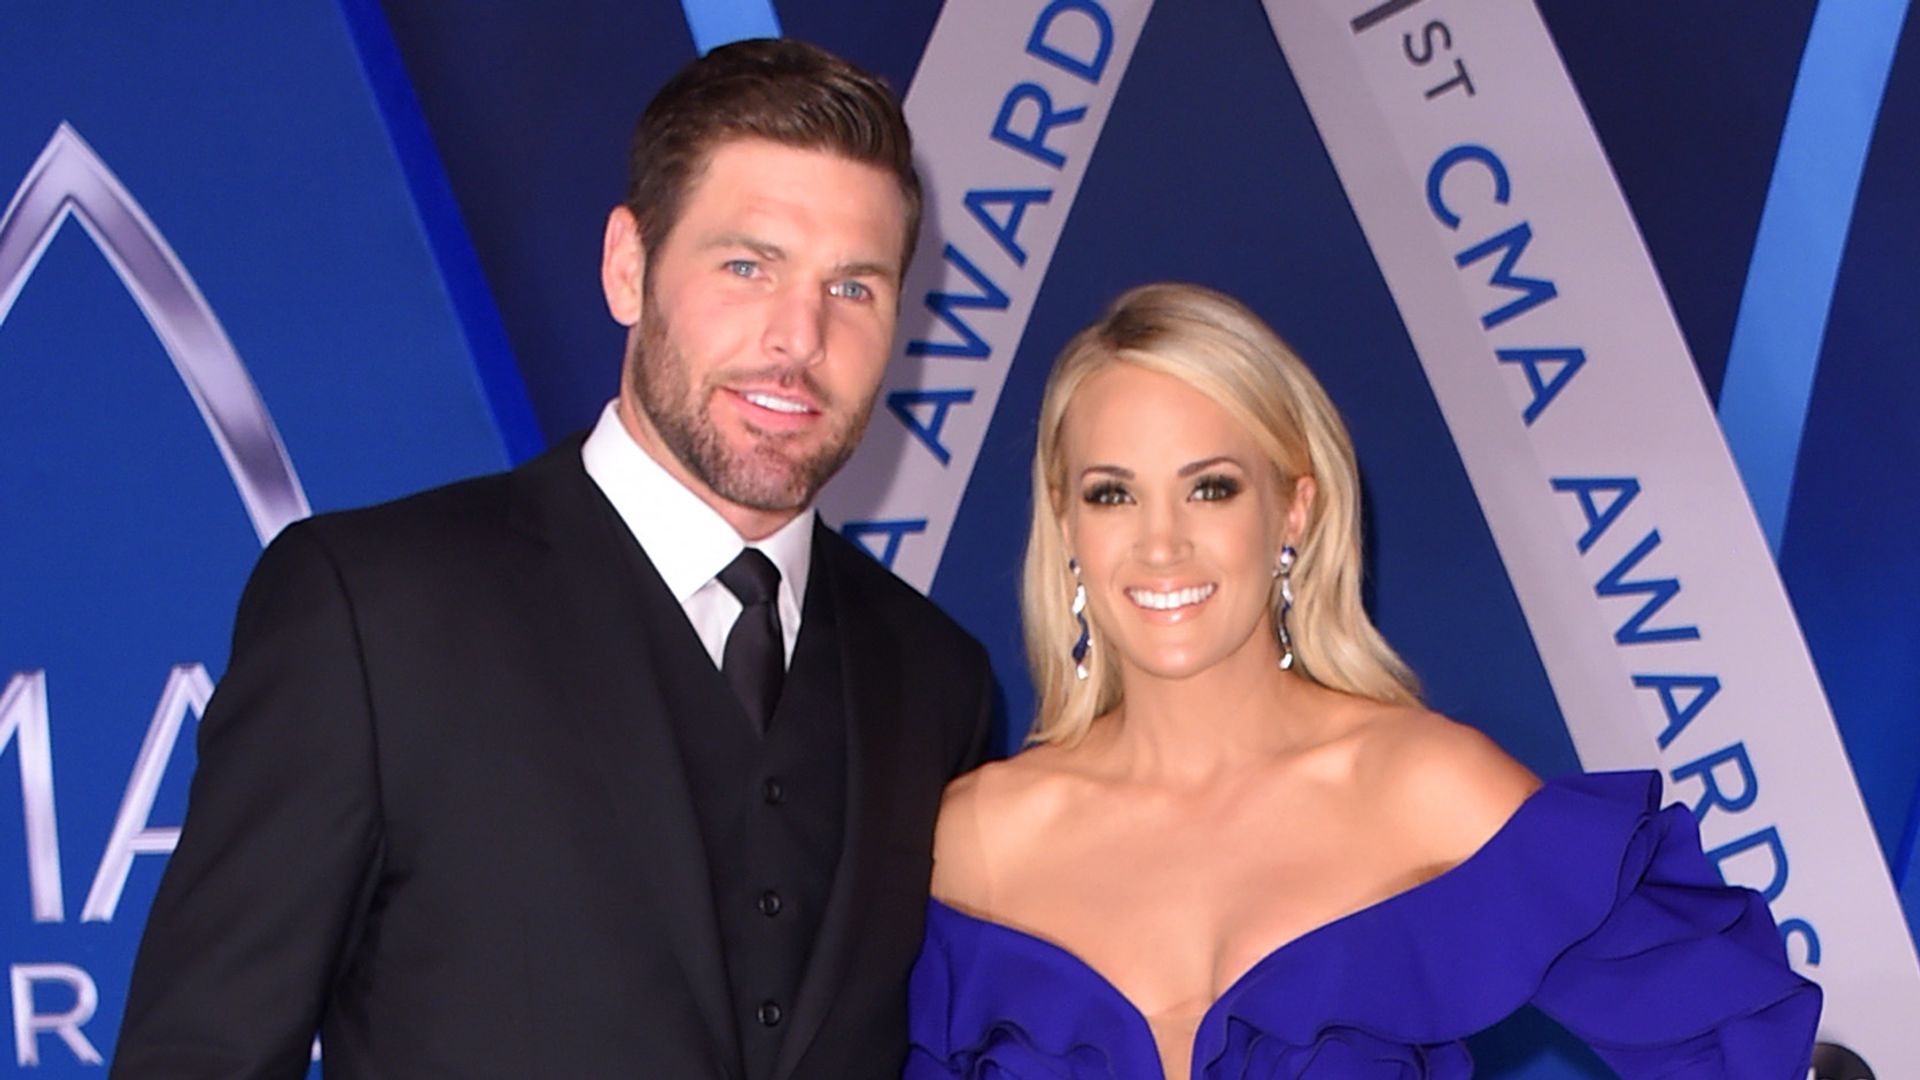 Carrie Underwood Mike Fisher cma awards